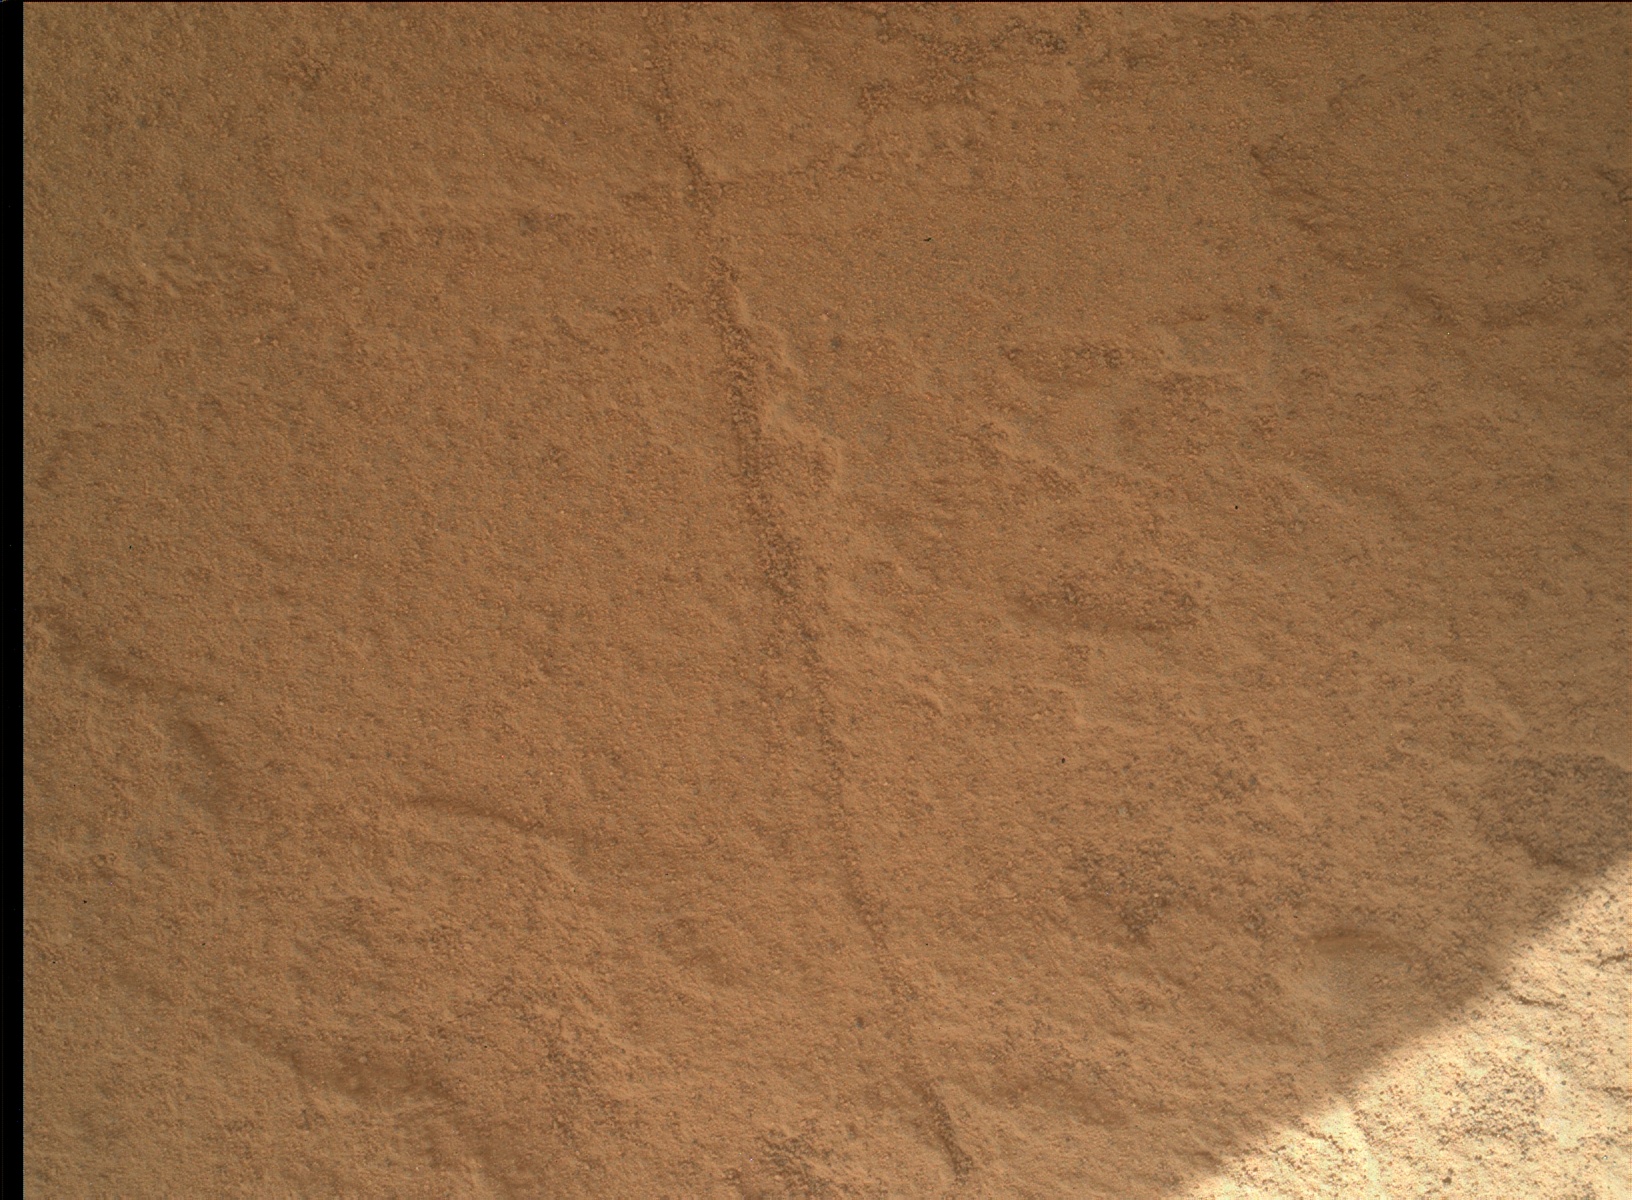 Nasa's Mars rover Curiosity acquired this image using its Mars Hand Lens Imager (MAHLI) on Sol 3735